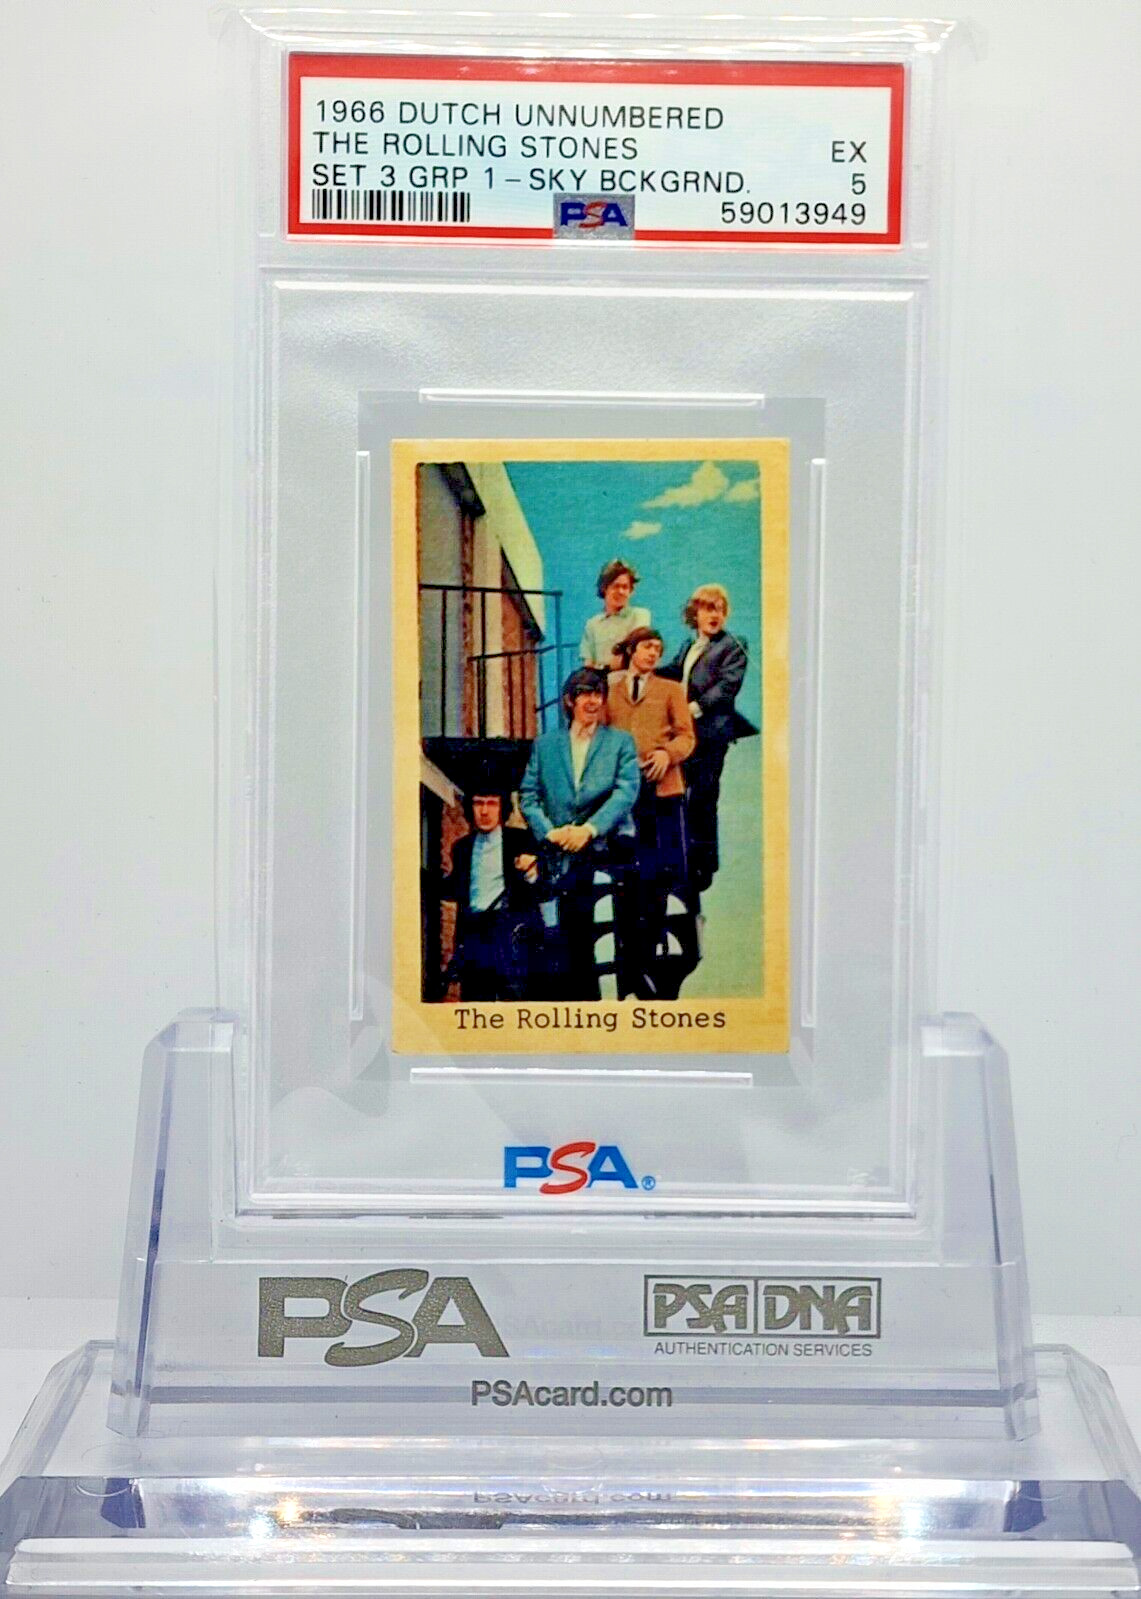 1966 The Rolling Stones PSA 5 Dutch Unnumbered Set 3 Group 1 Sky Background 